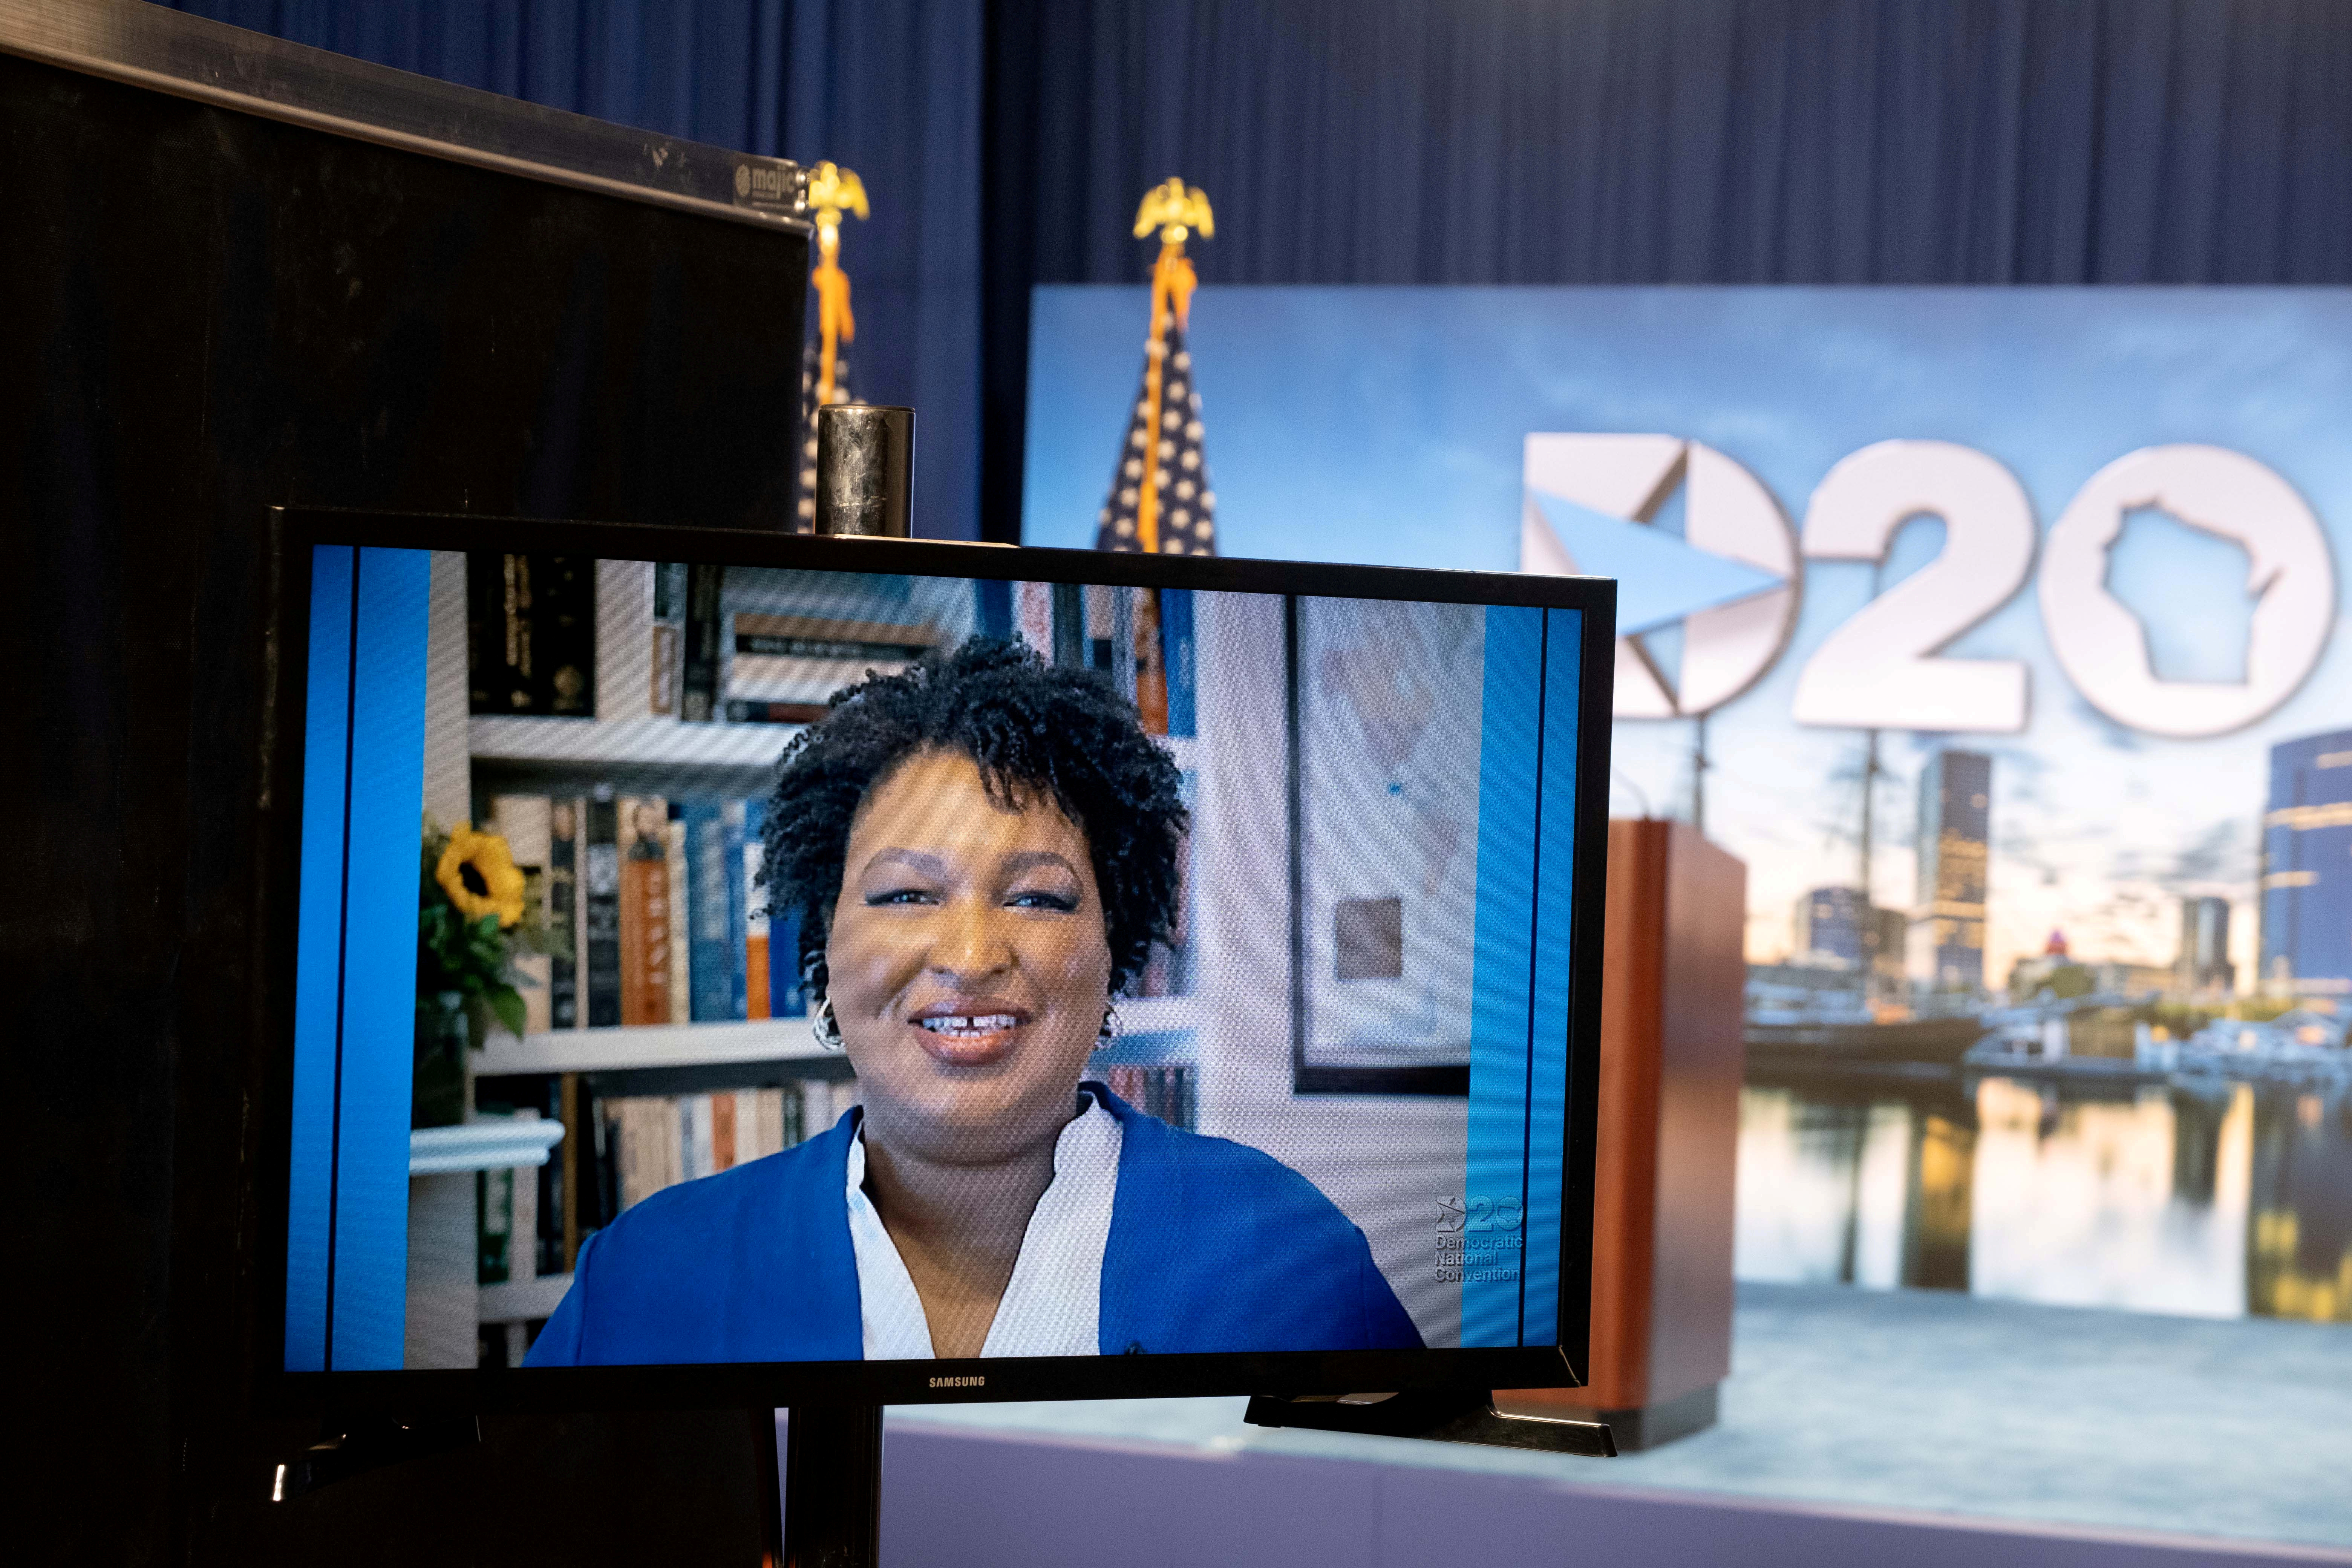 Stacey Abrams speaks at Democratic National Convention in Milwaukee, Wisconsin, U.S. August 18, 2020